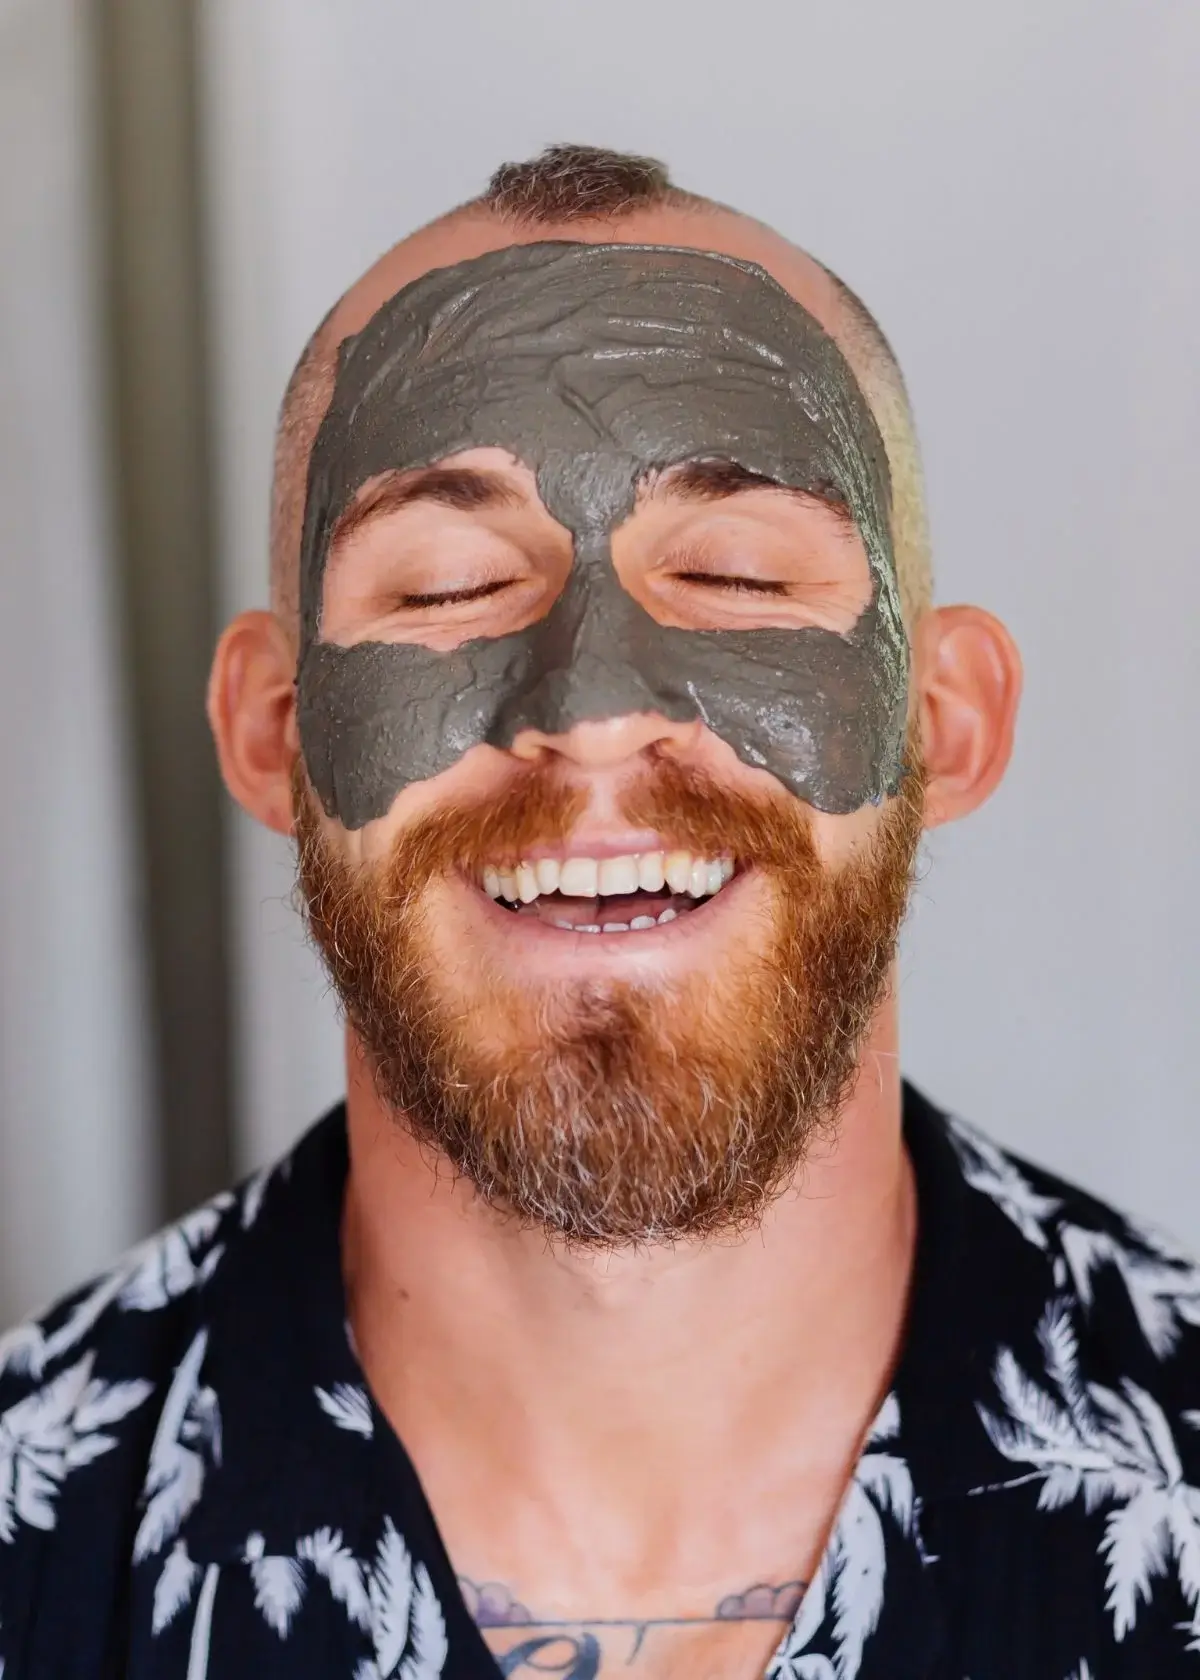 How to apply Men's charcoal face mask?